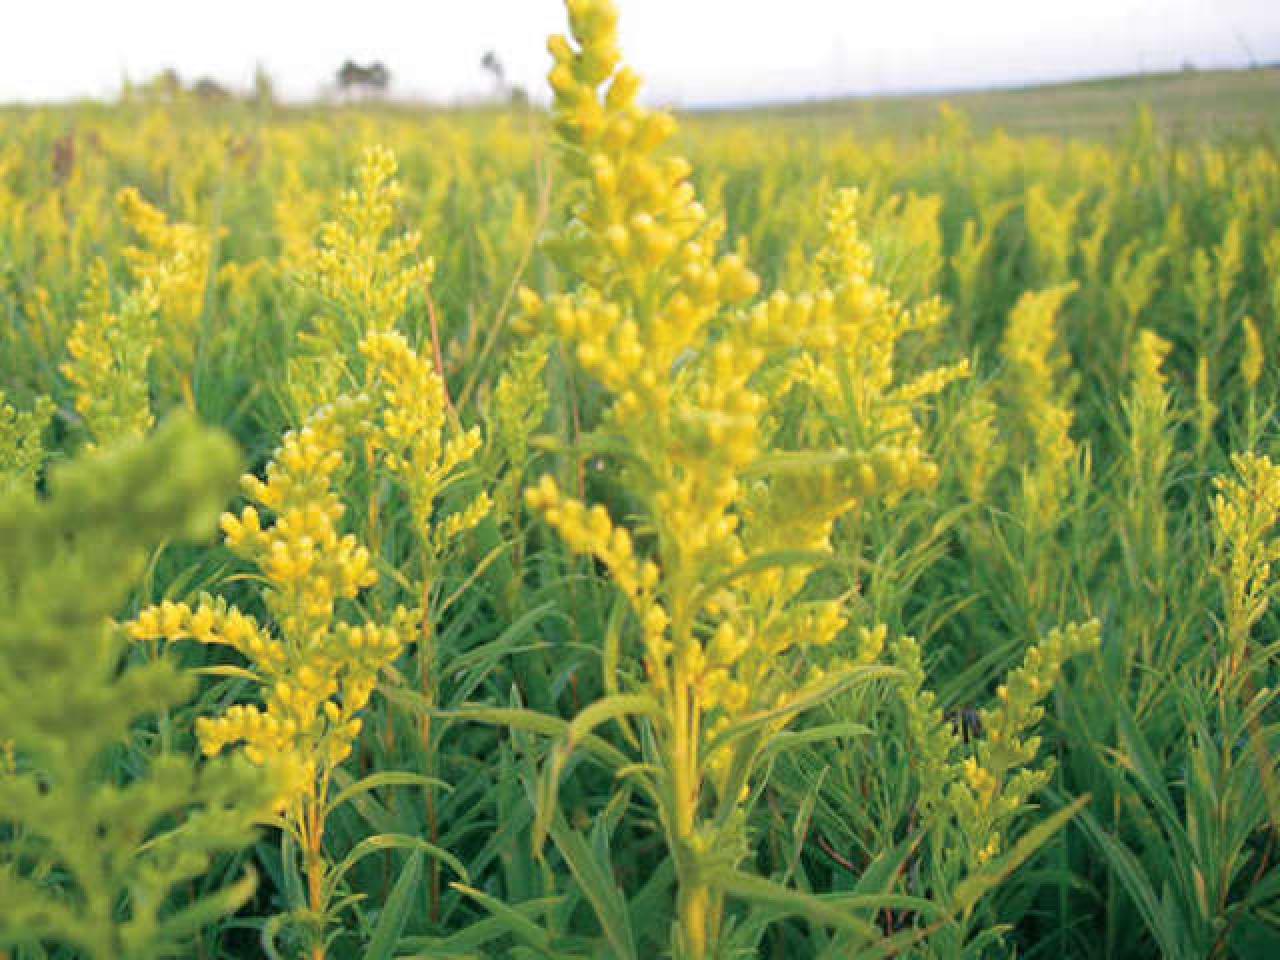 What does a goldenrod flower look like?